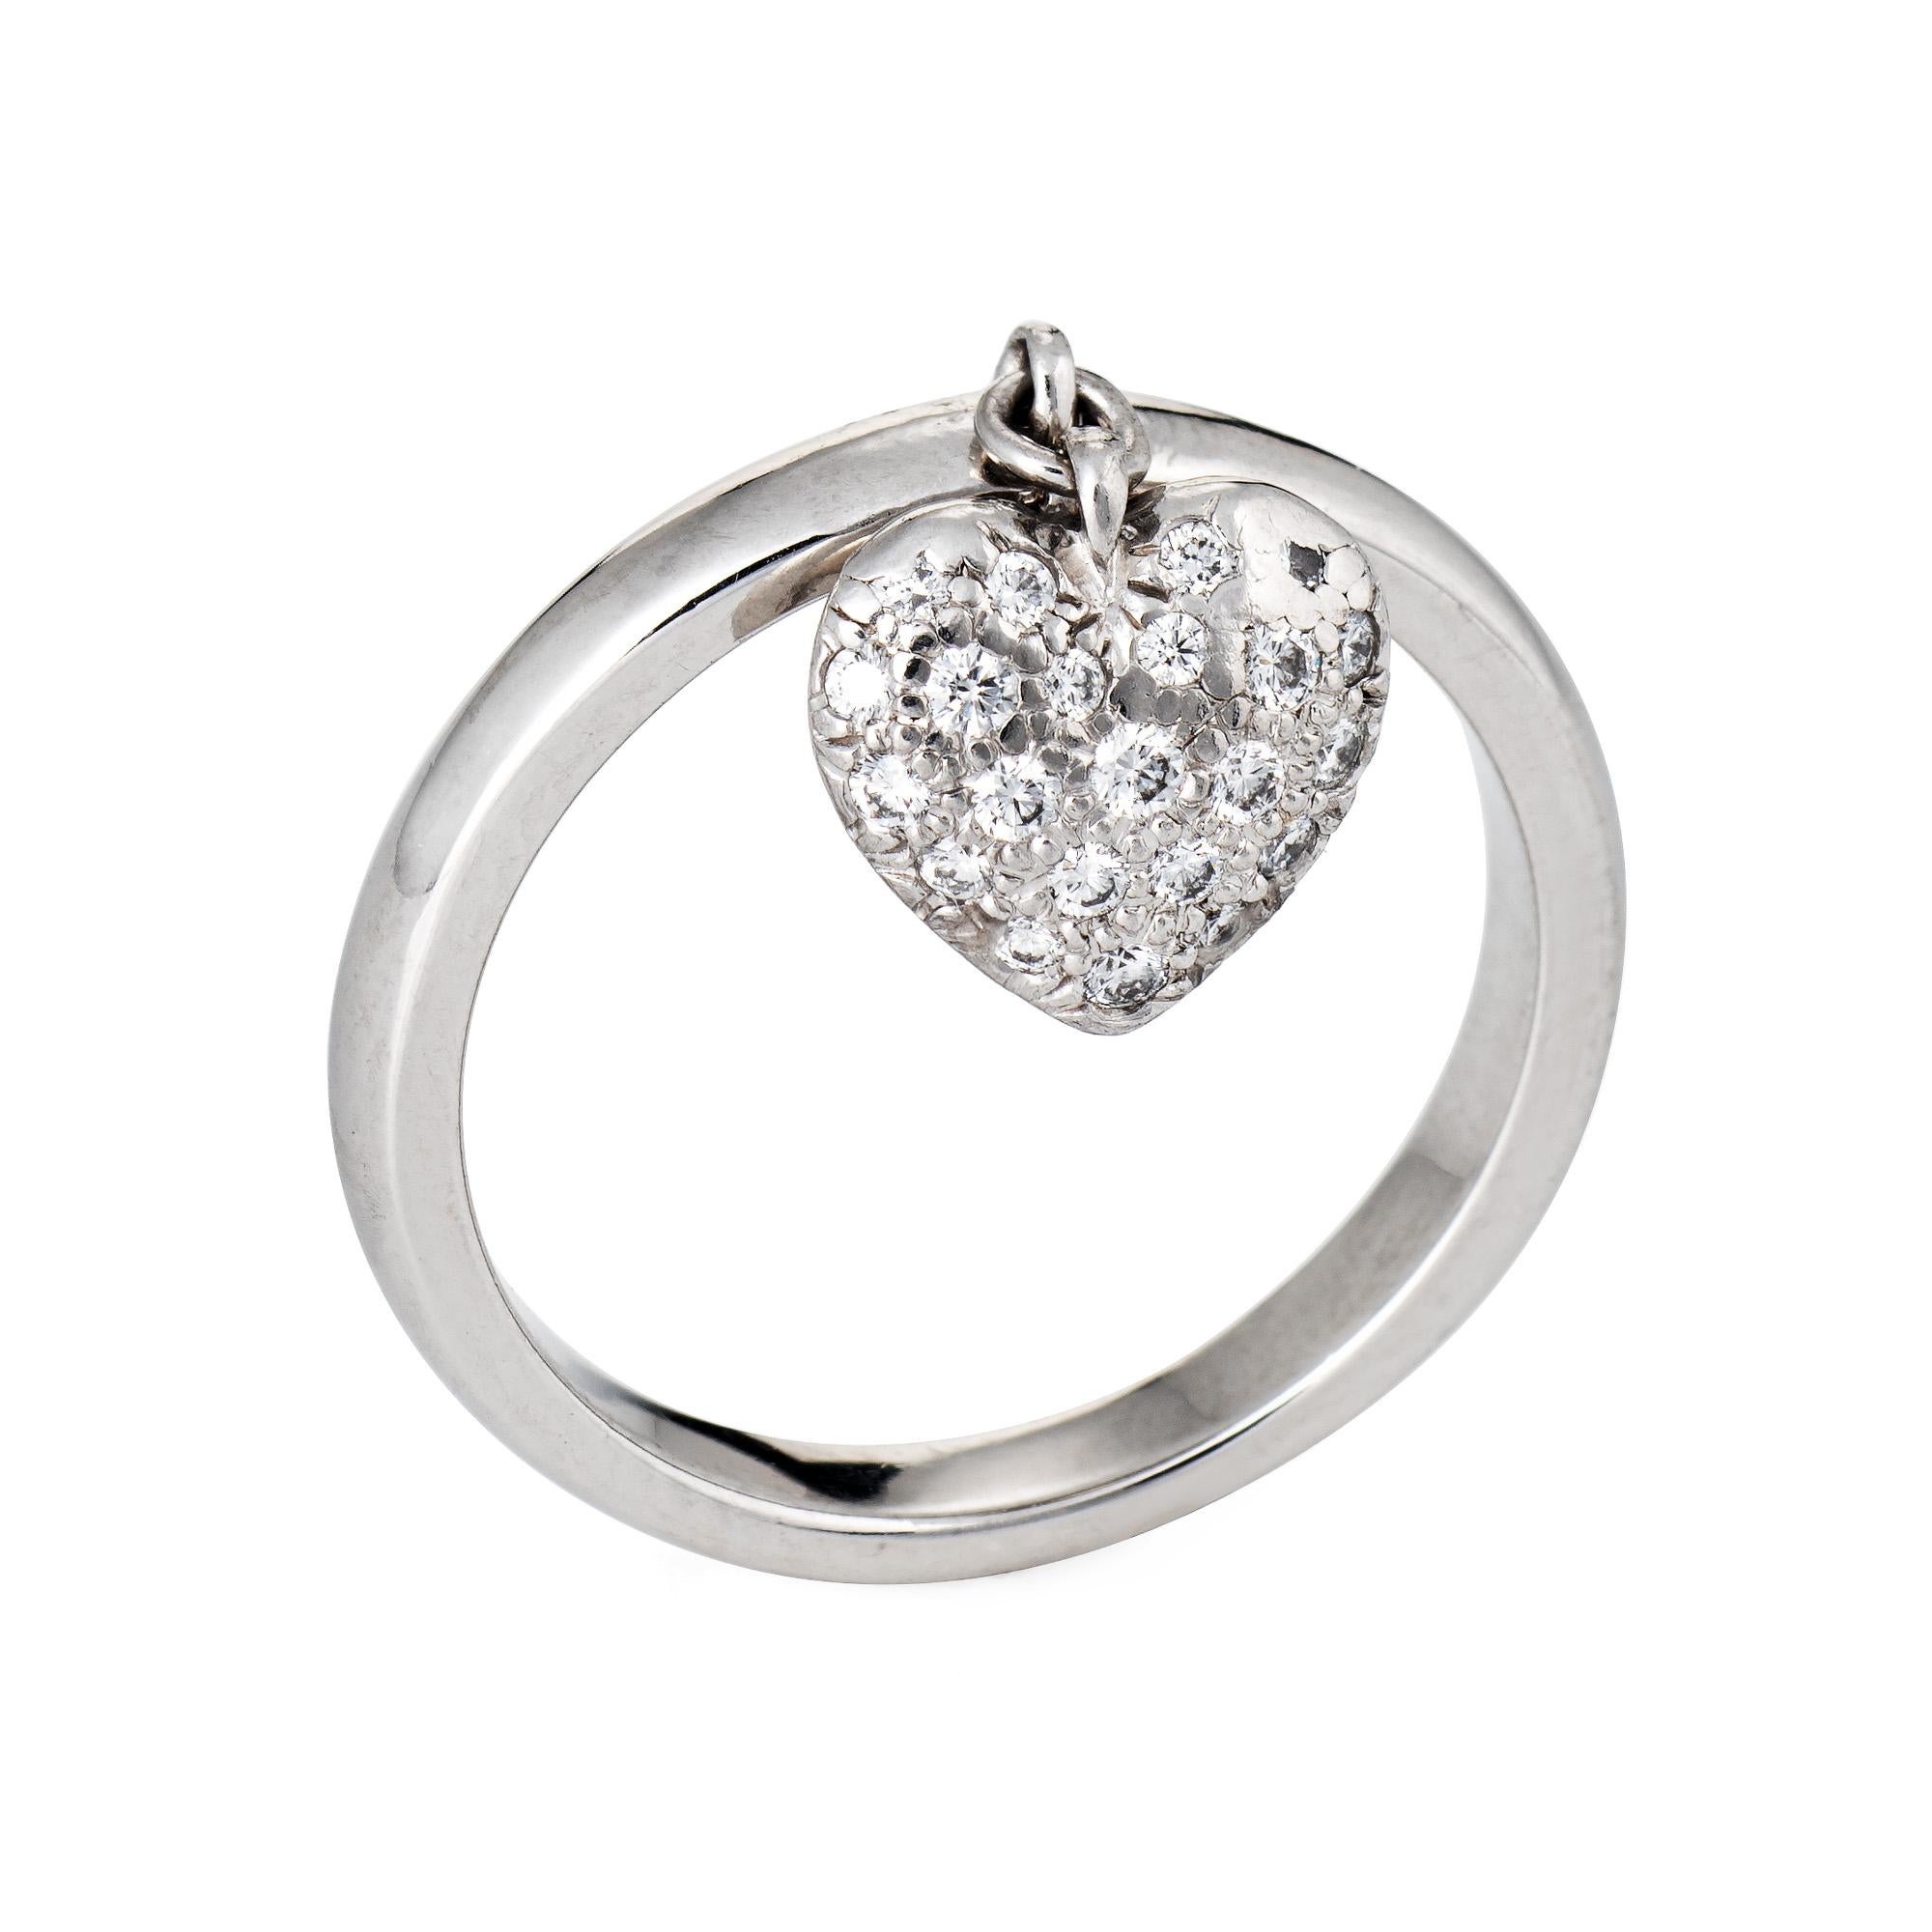 Finely detailed pre owned Tiffany & Co pave diamond heart charm ring crafted in platinum. 

Diamonds are pave set into the heart and total an estimated 0.20 carats (estimated at F-G color and VVS2 clarity).  

The stylish ring features a diamond set